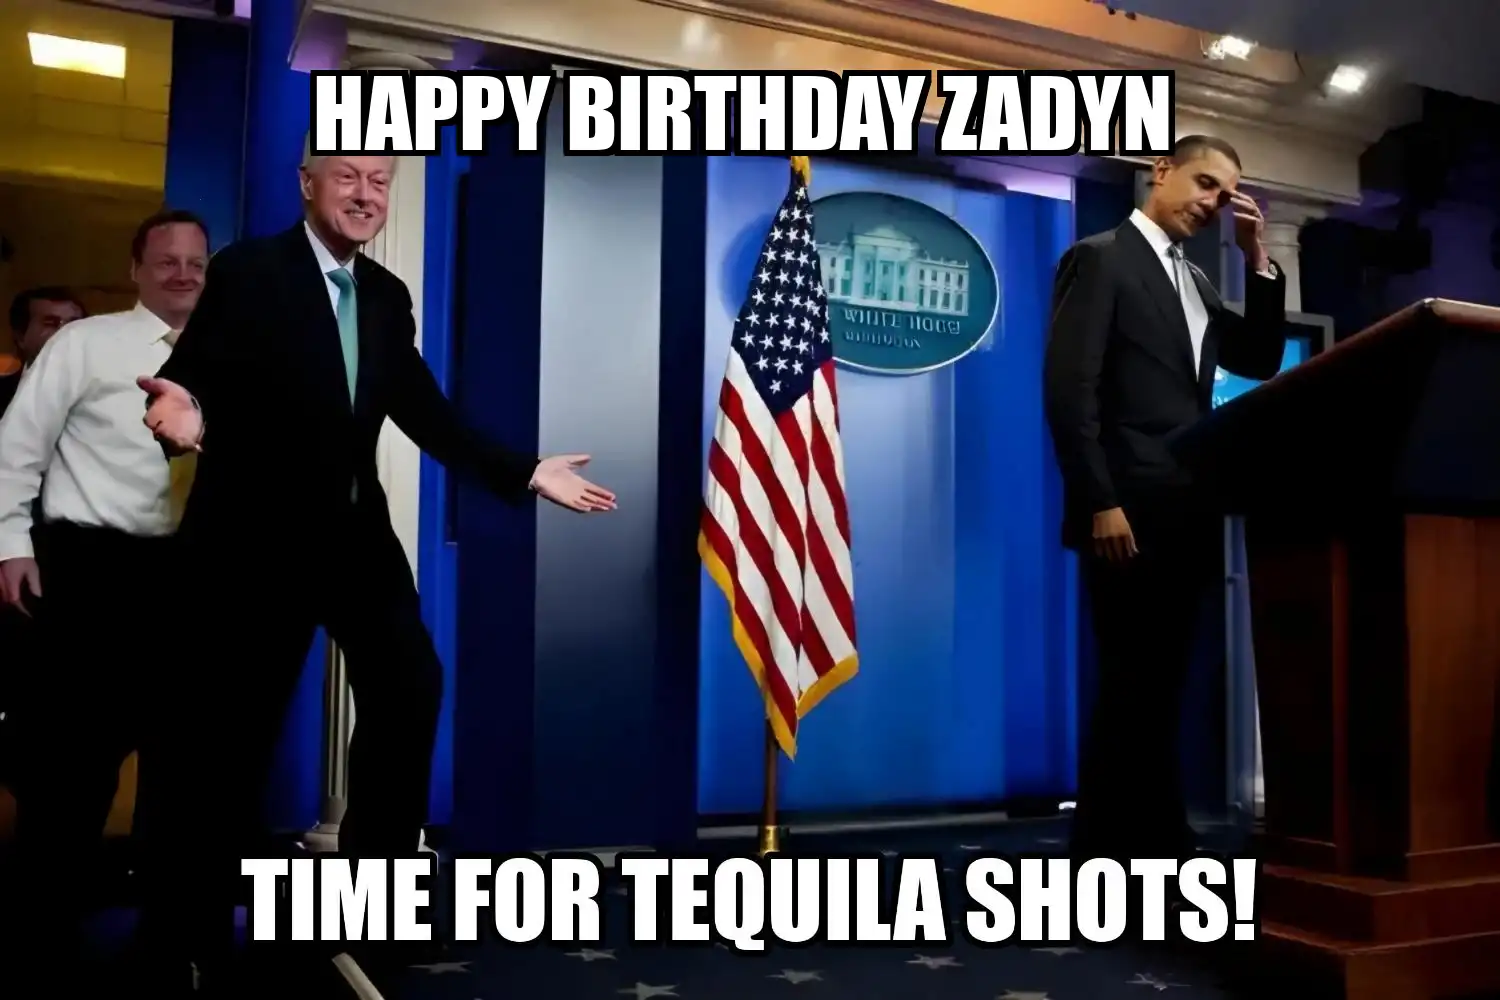 Happy Birthday Zadyn Time For Tequila Shots Memes